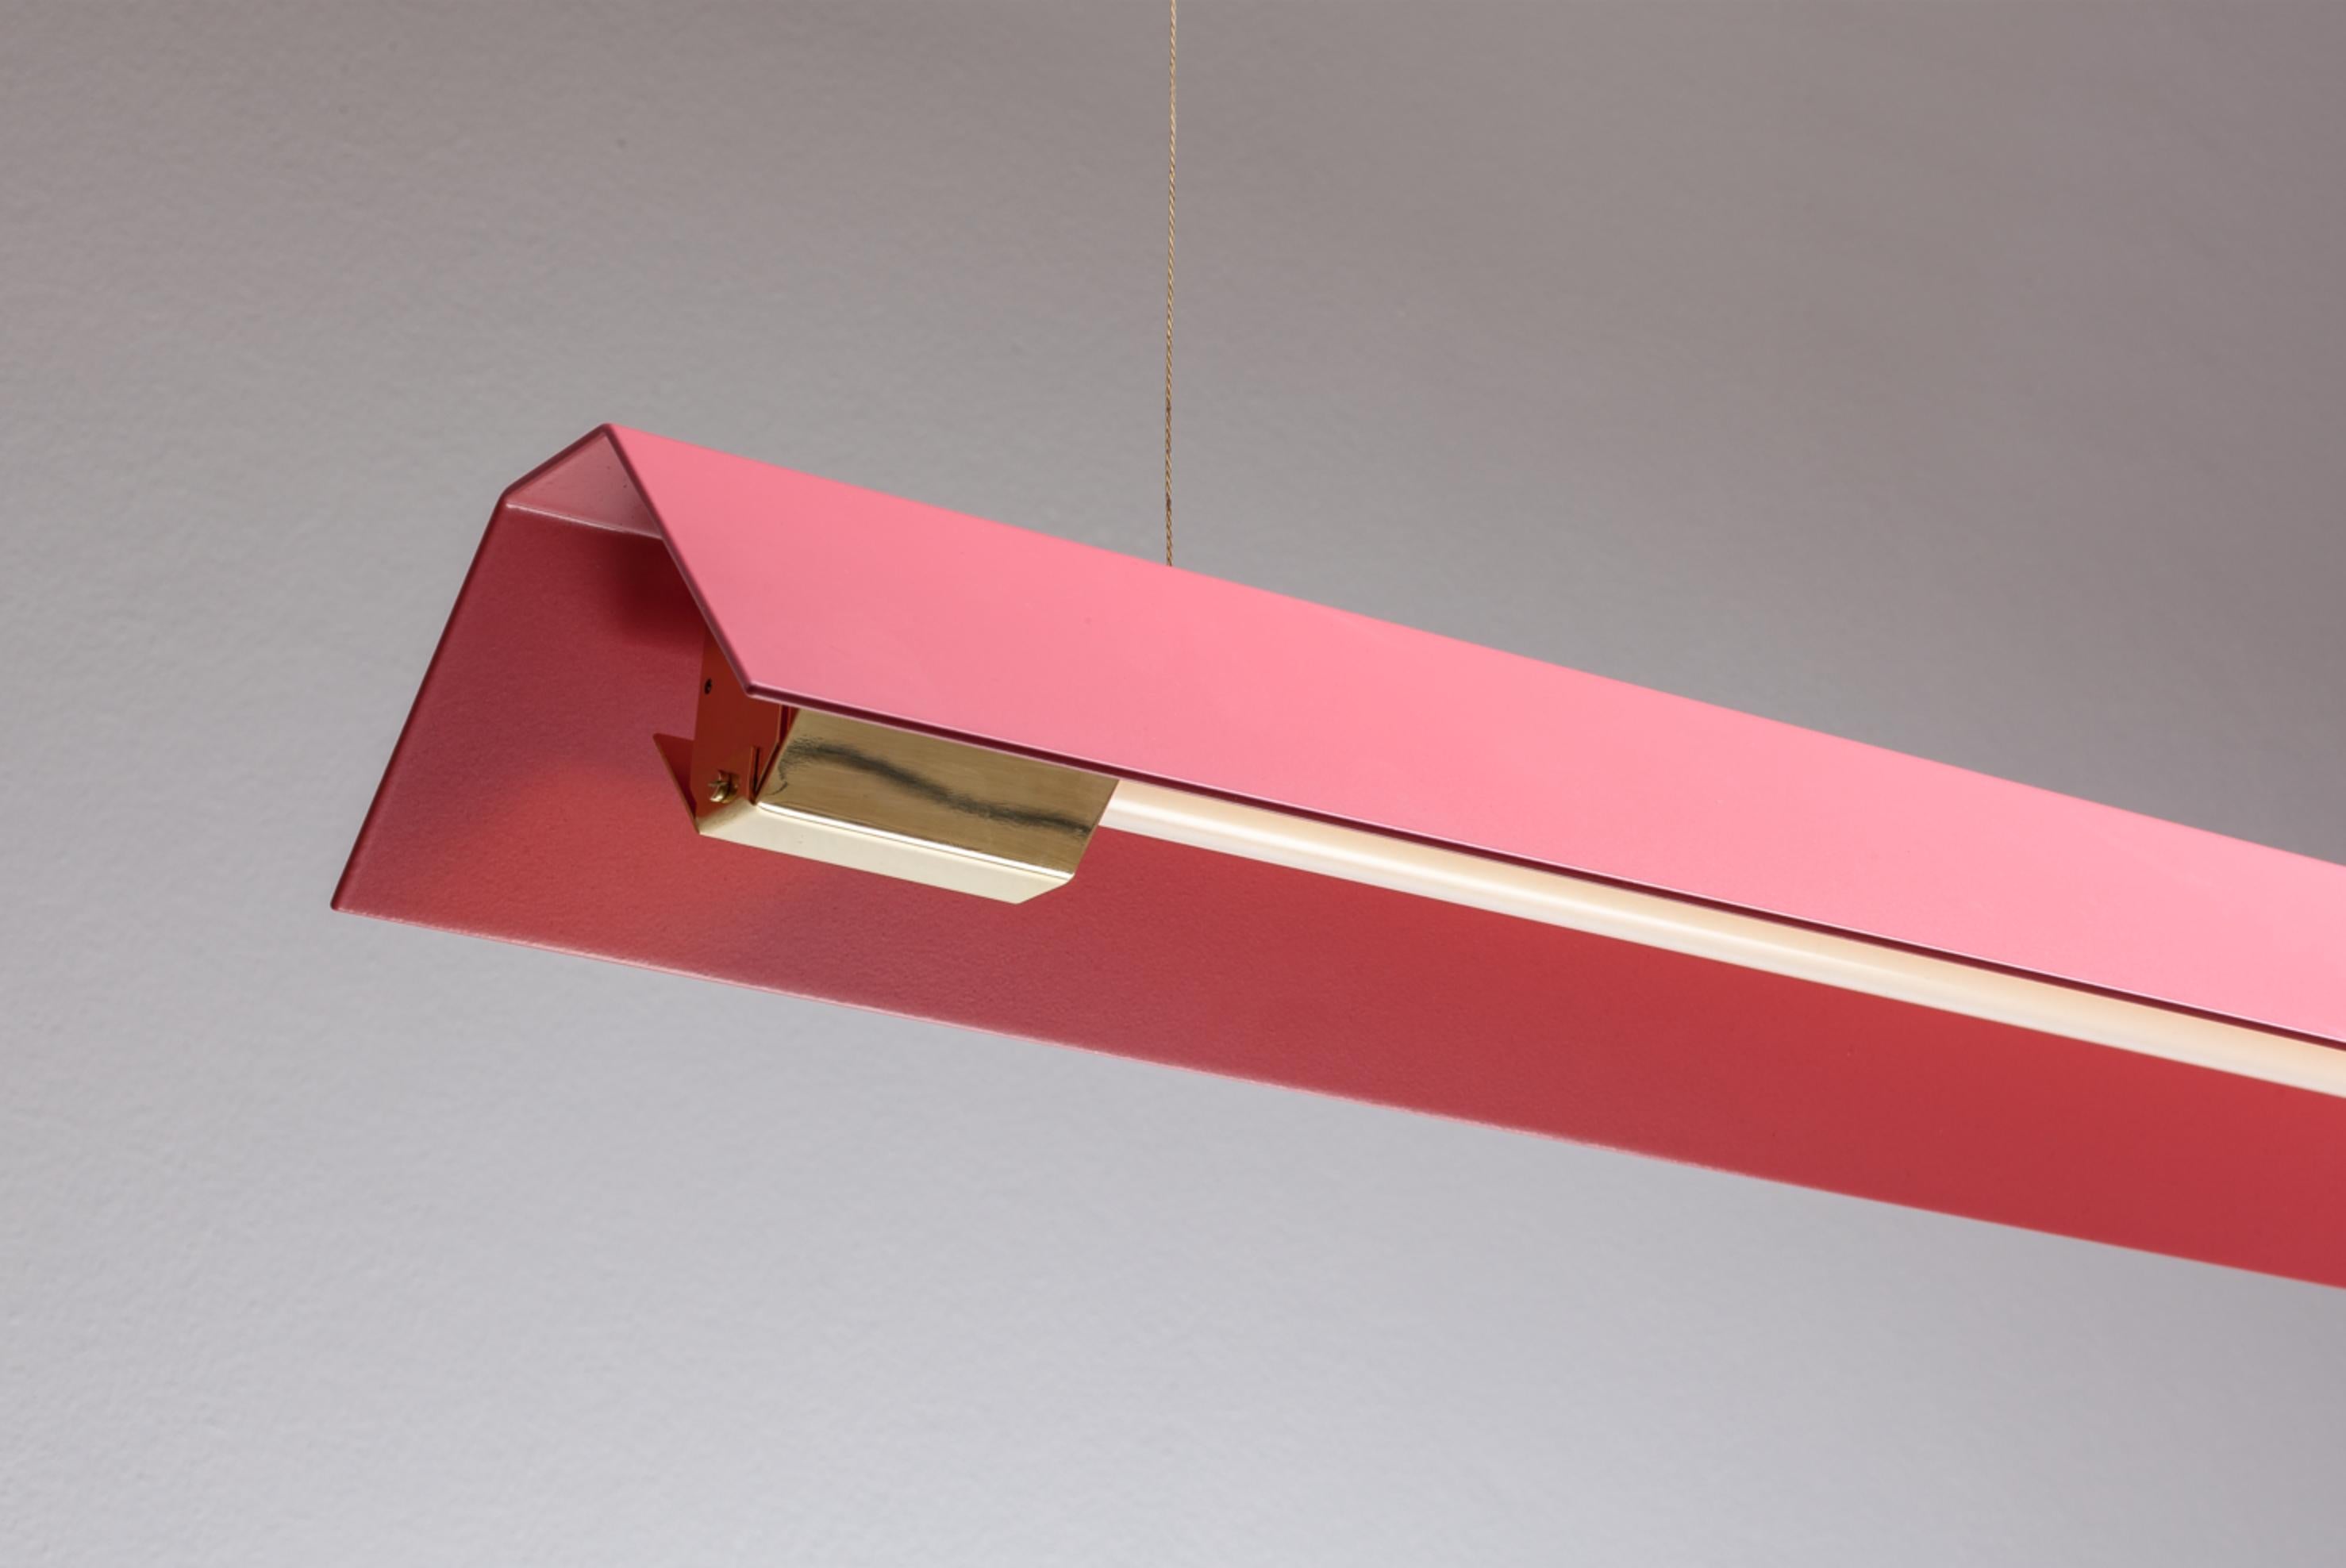 Medium Misalliance ex antique pink suspended light by Lexavala.
Dimensions: D 16 x W 100 x H 8 cm.
Materials: powder coated shade with details made of brass or stainless steel.

There are two lenghts of socket covers, extending over the LED. Two